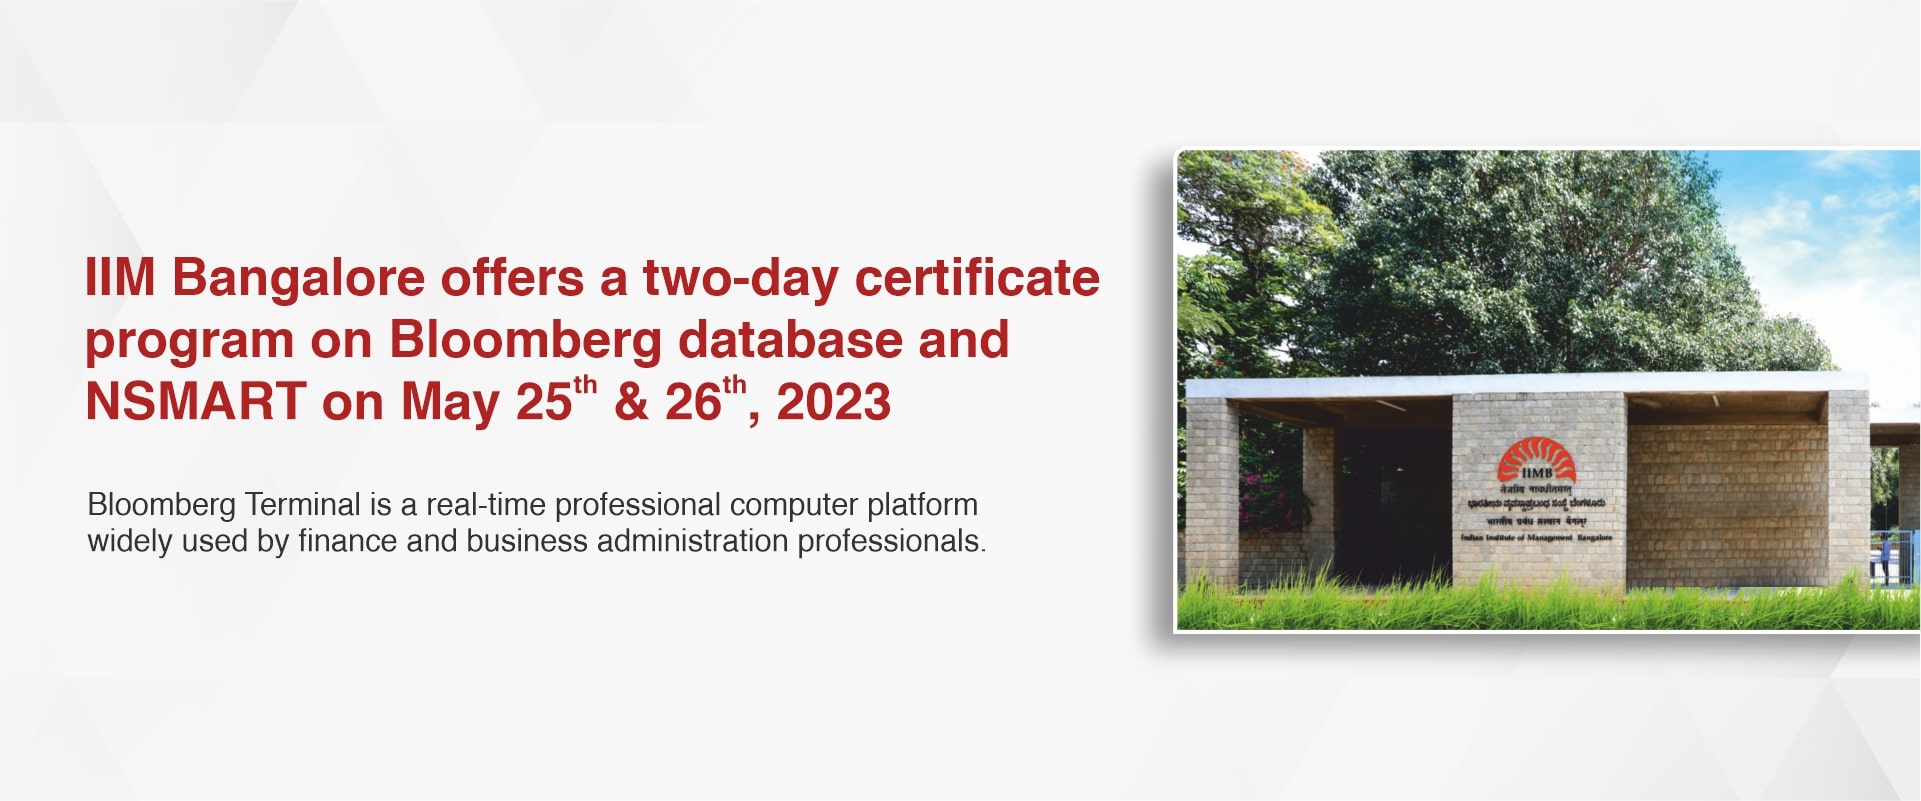 IIM Bangalore offers a two-day certificate program on Bloomberg database and NSMART on May 25th & 26th, 2023